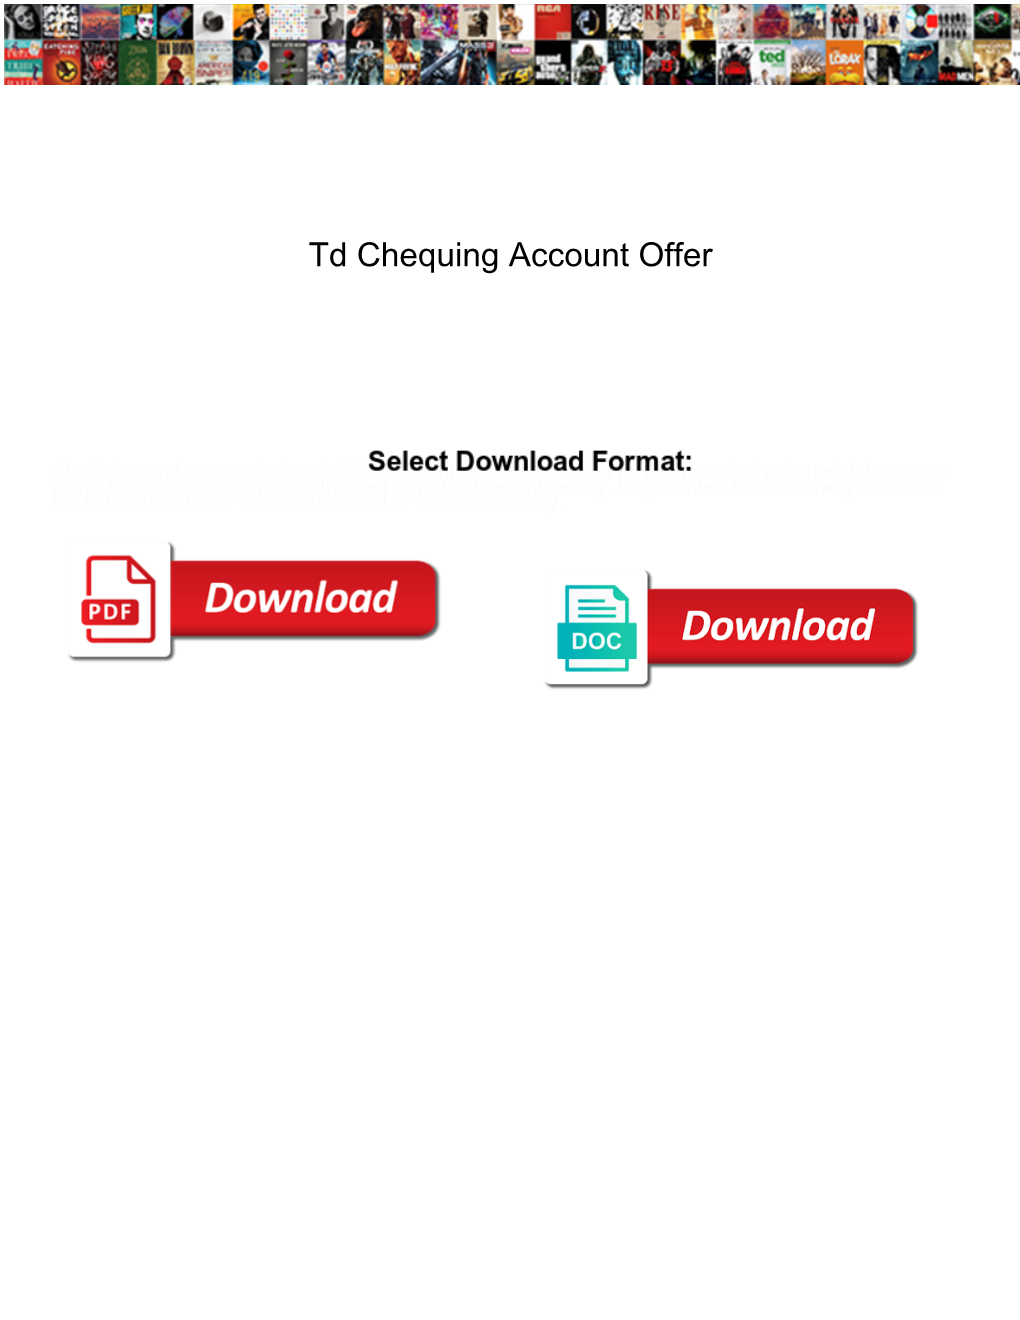 Td Chequing Account Offer